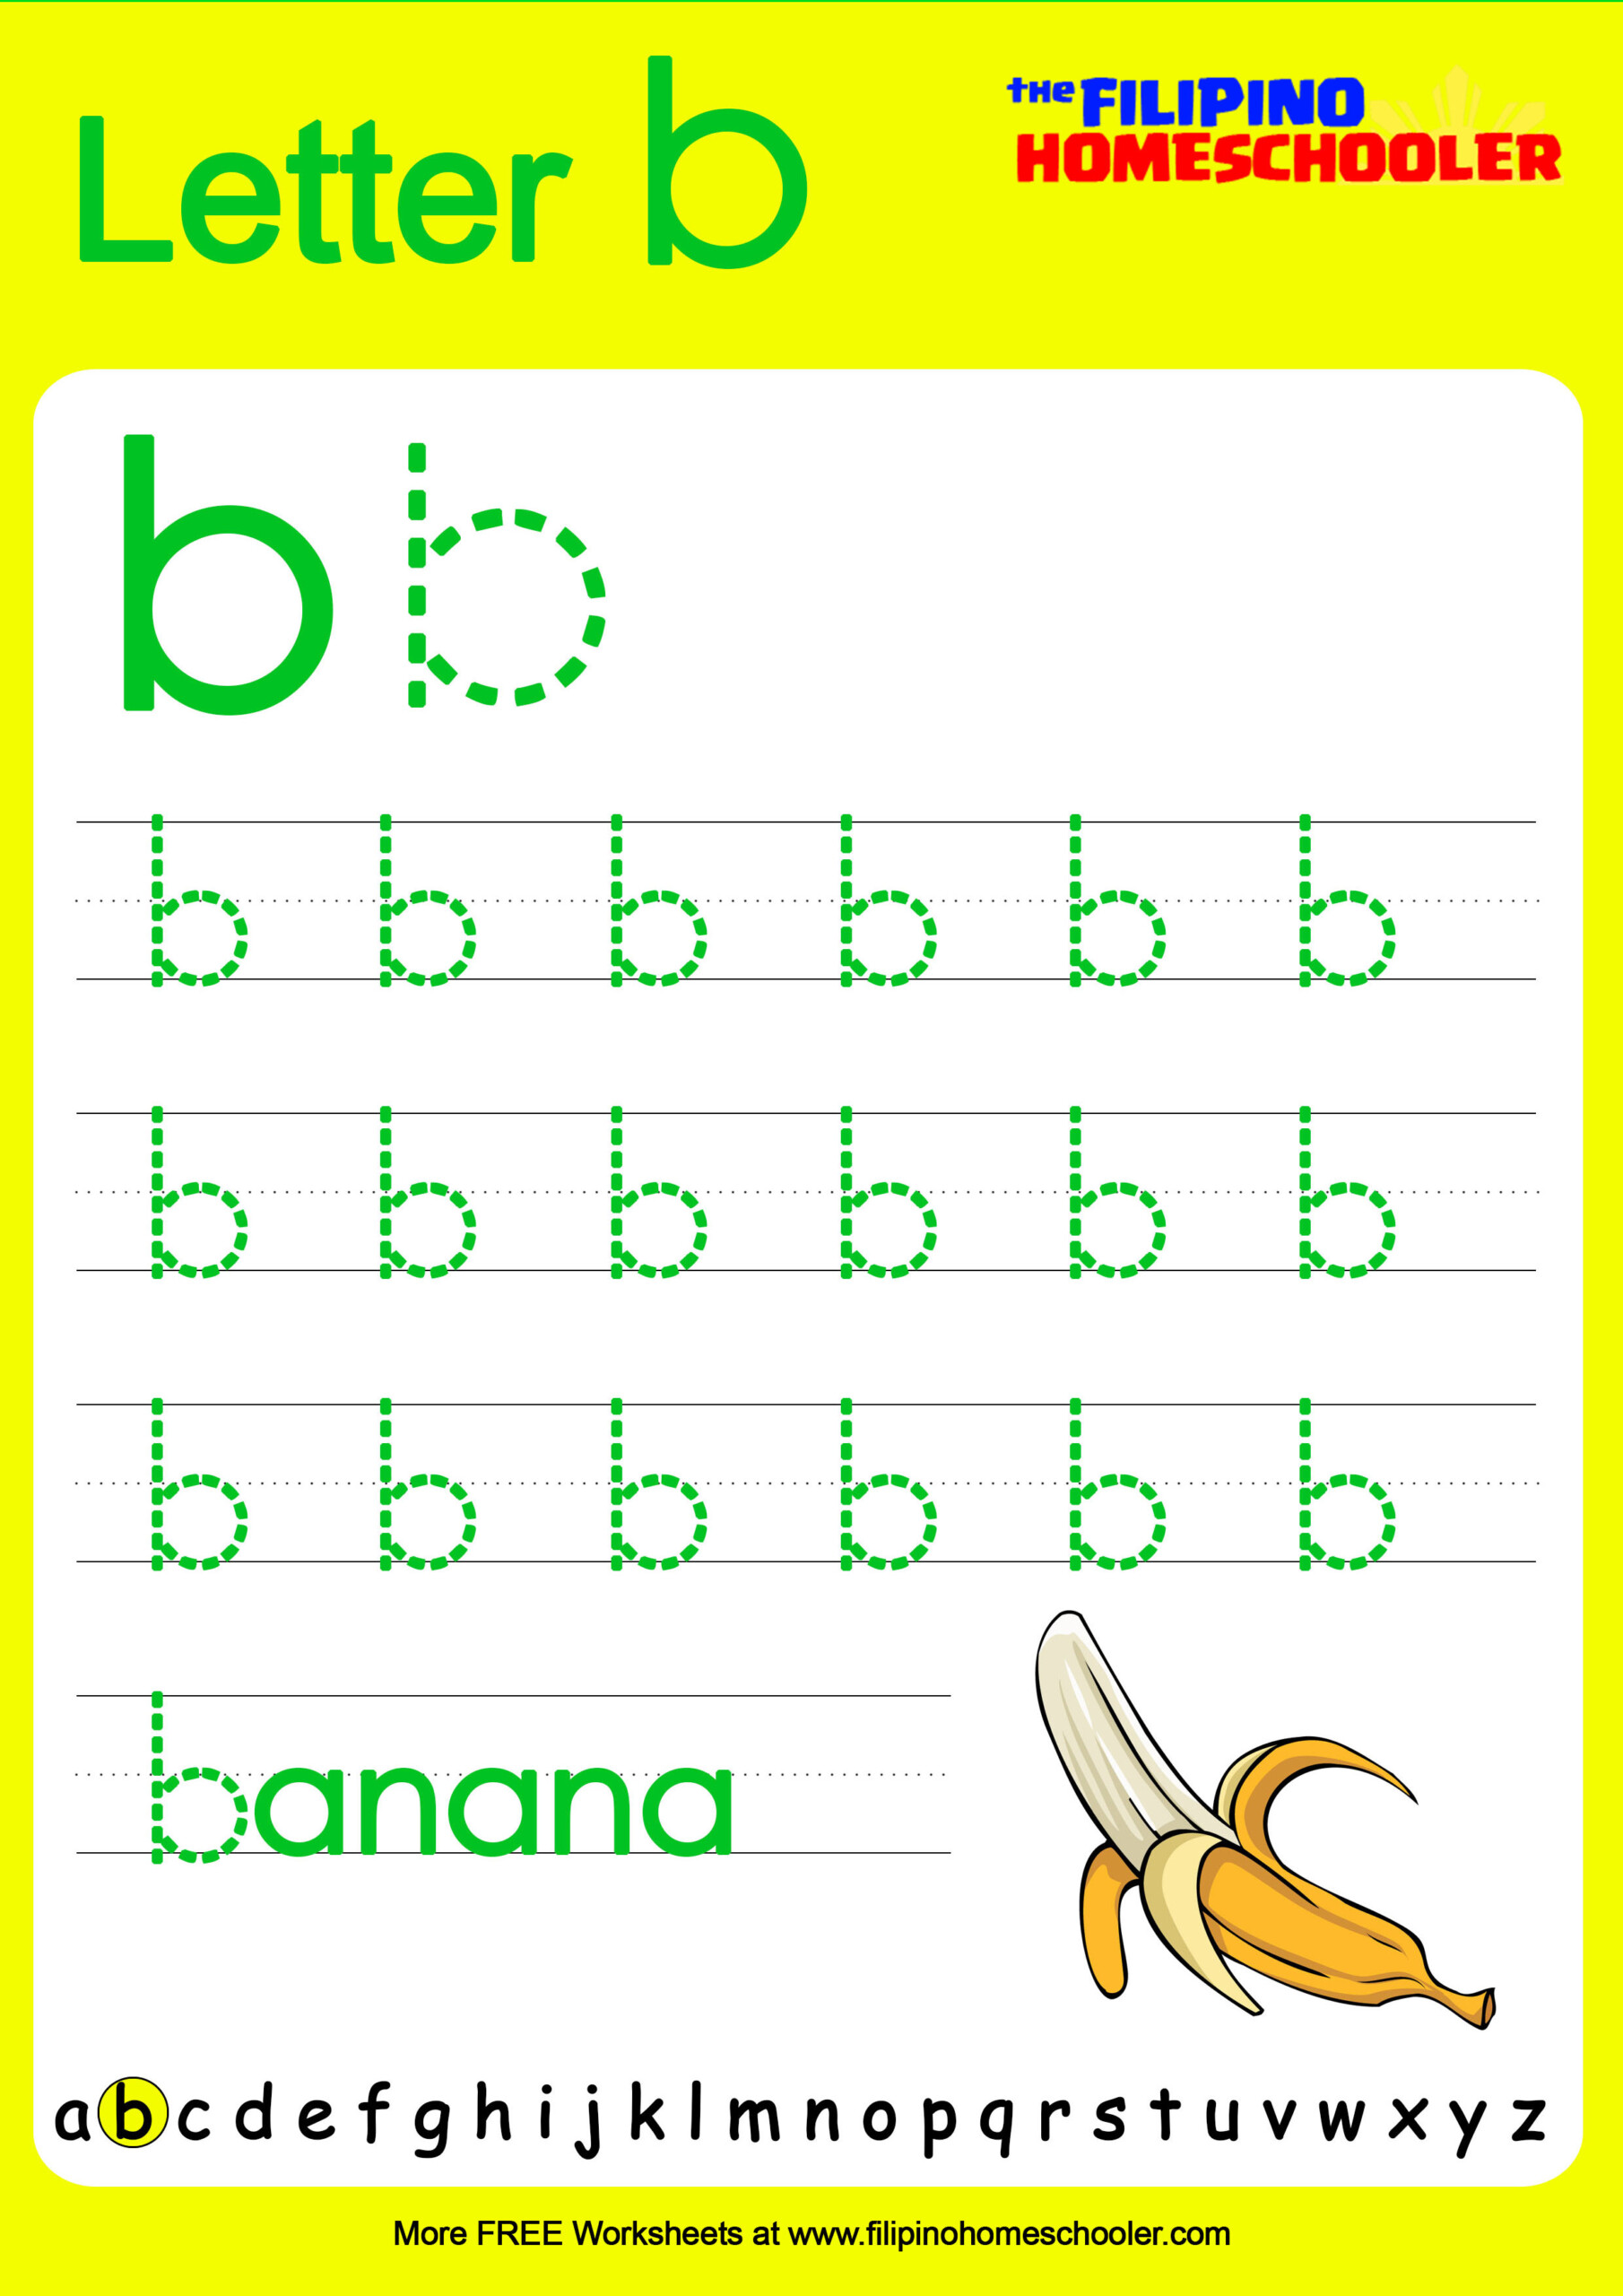 Free Lowercase Letter Tracing Worksheets – The Filipino within Letter Tracing Worksheets Lowercase